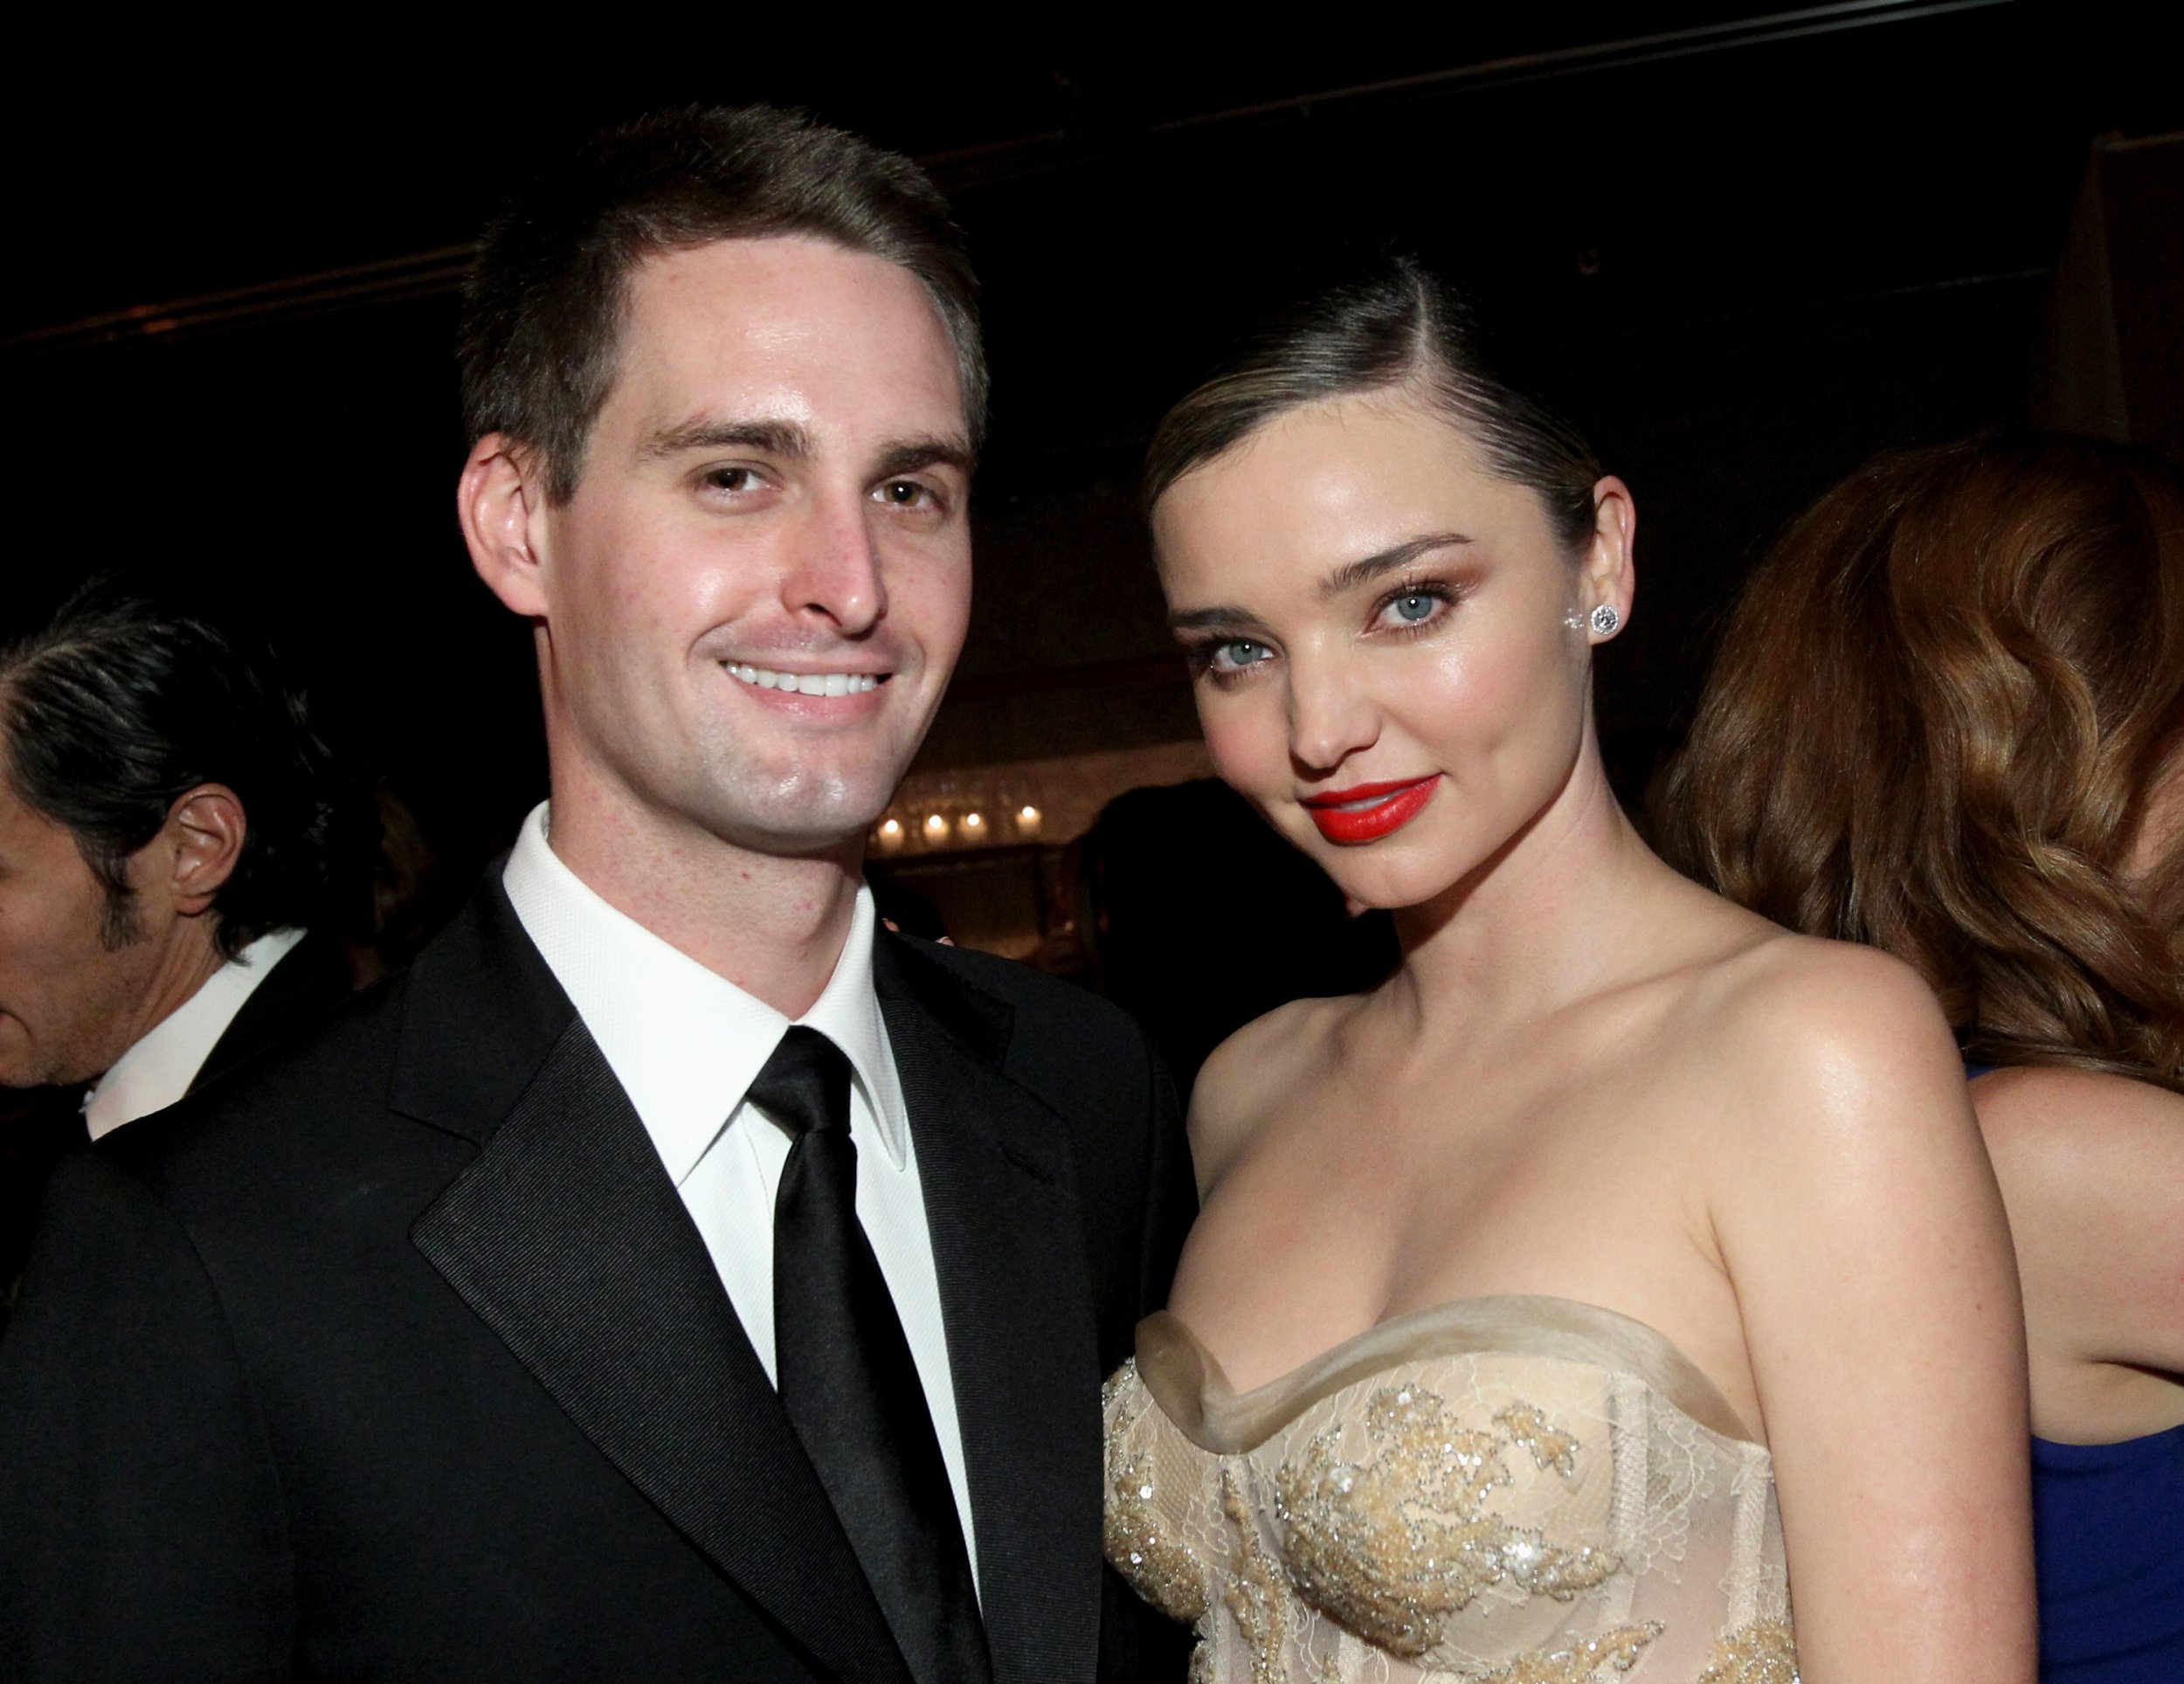 Evan Spiegel Net Worth At 29, Snap CEO Is Among Youngest Billionaires